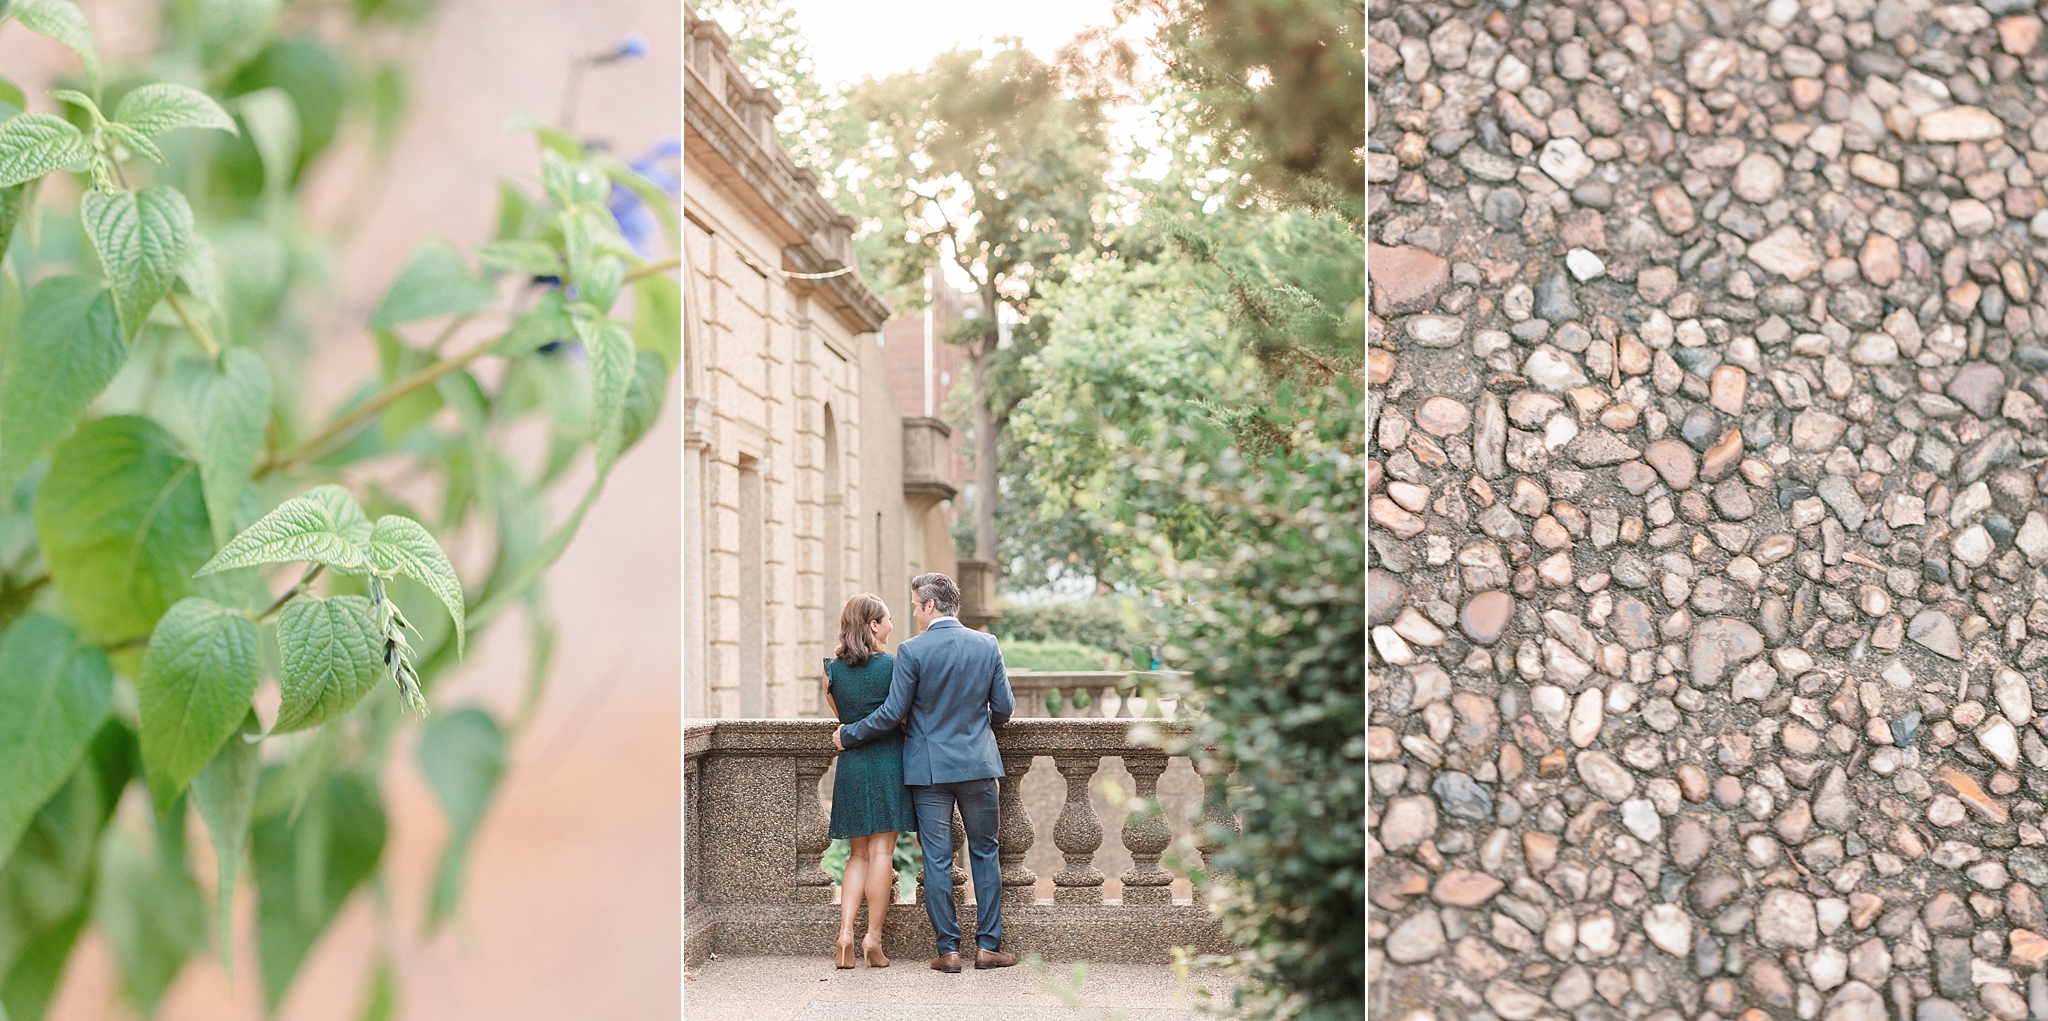 This stunning set of Meridian Hill Park engagement photos were photographed in Washington, DC by Alicia Lacey.